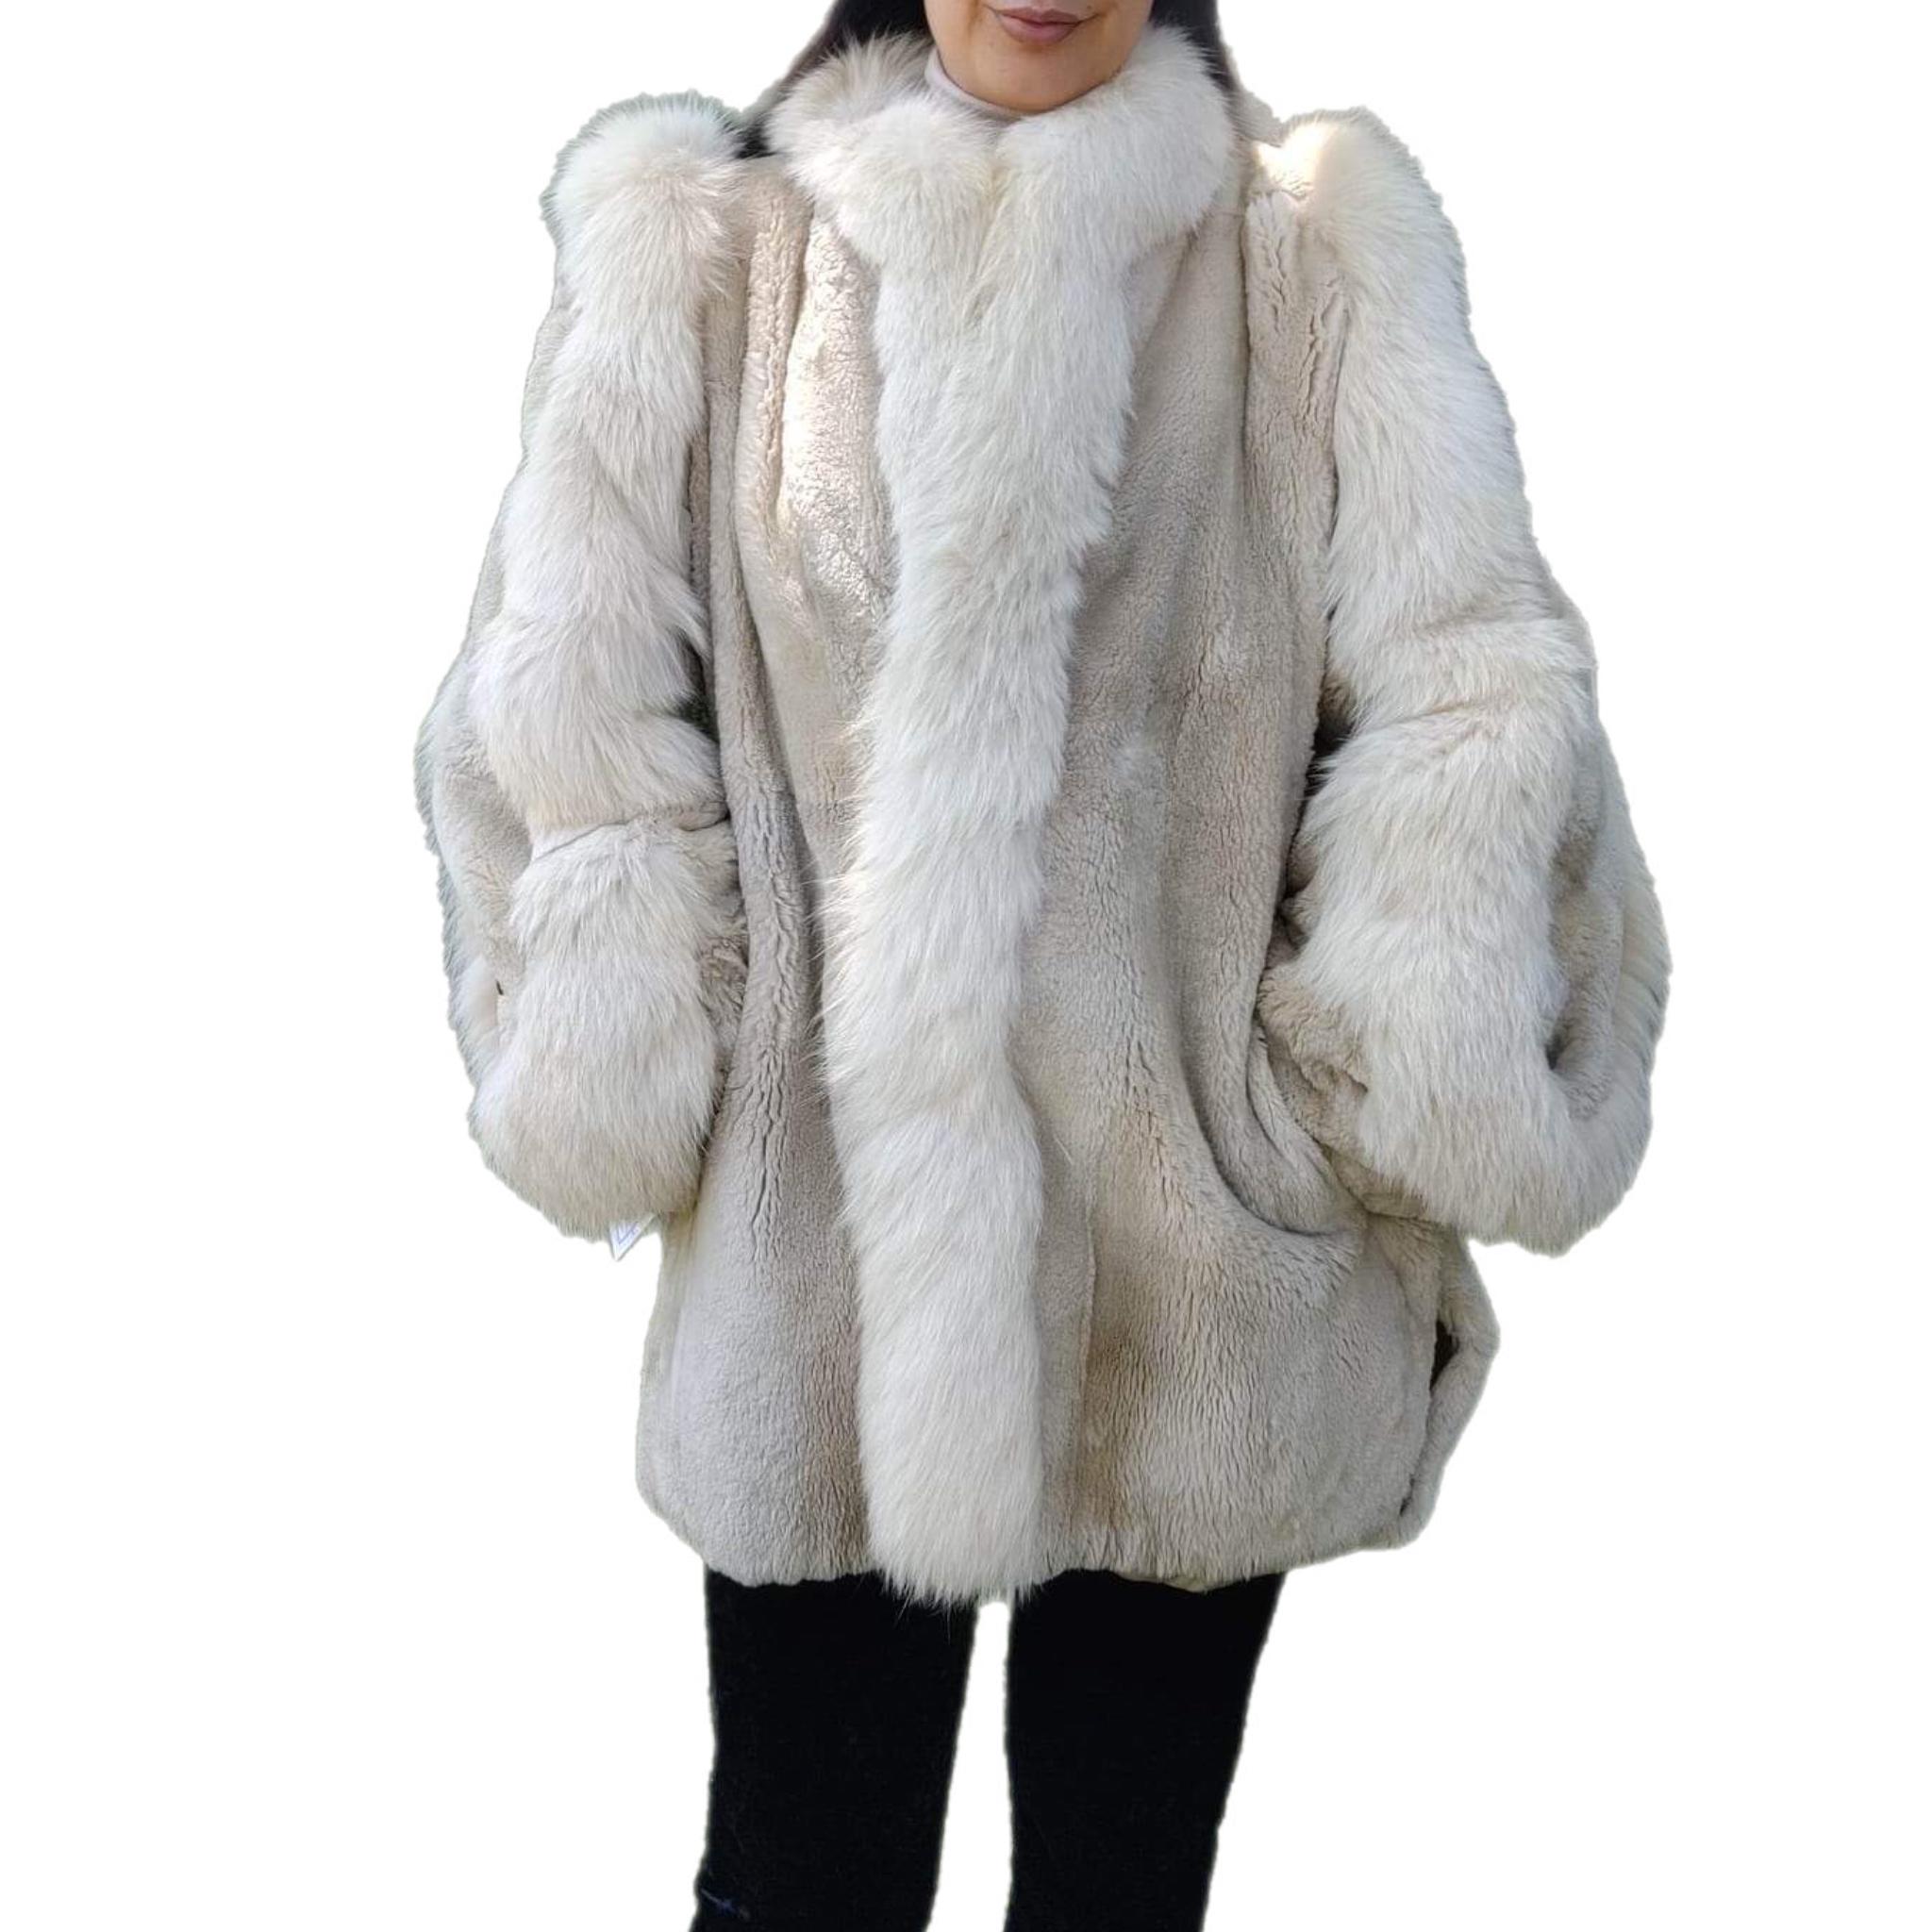 Sheared Beaver Fur Coat with Fur Trim (Size 8-M) In New Condition For Sale In Montreal, Quebec